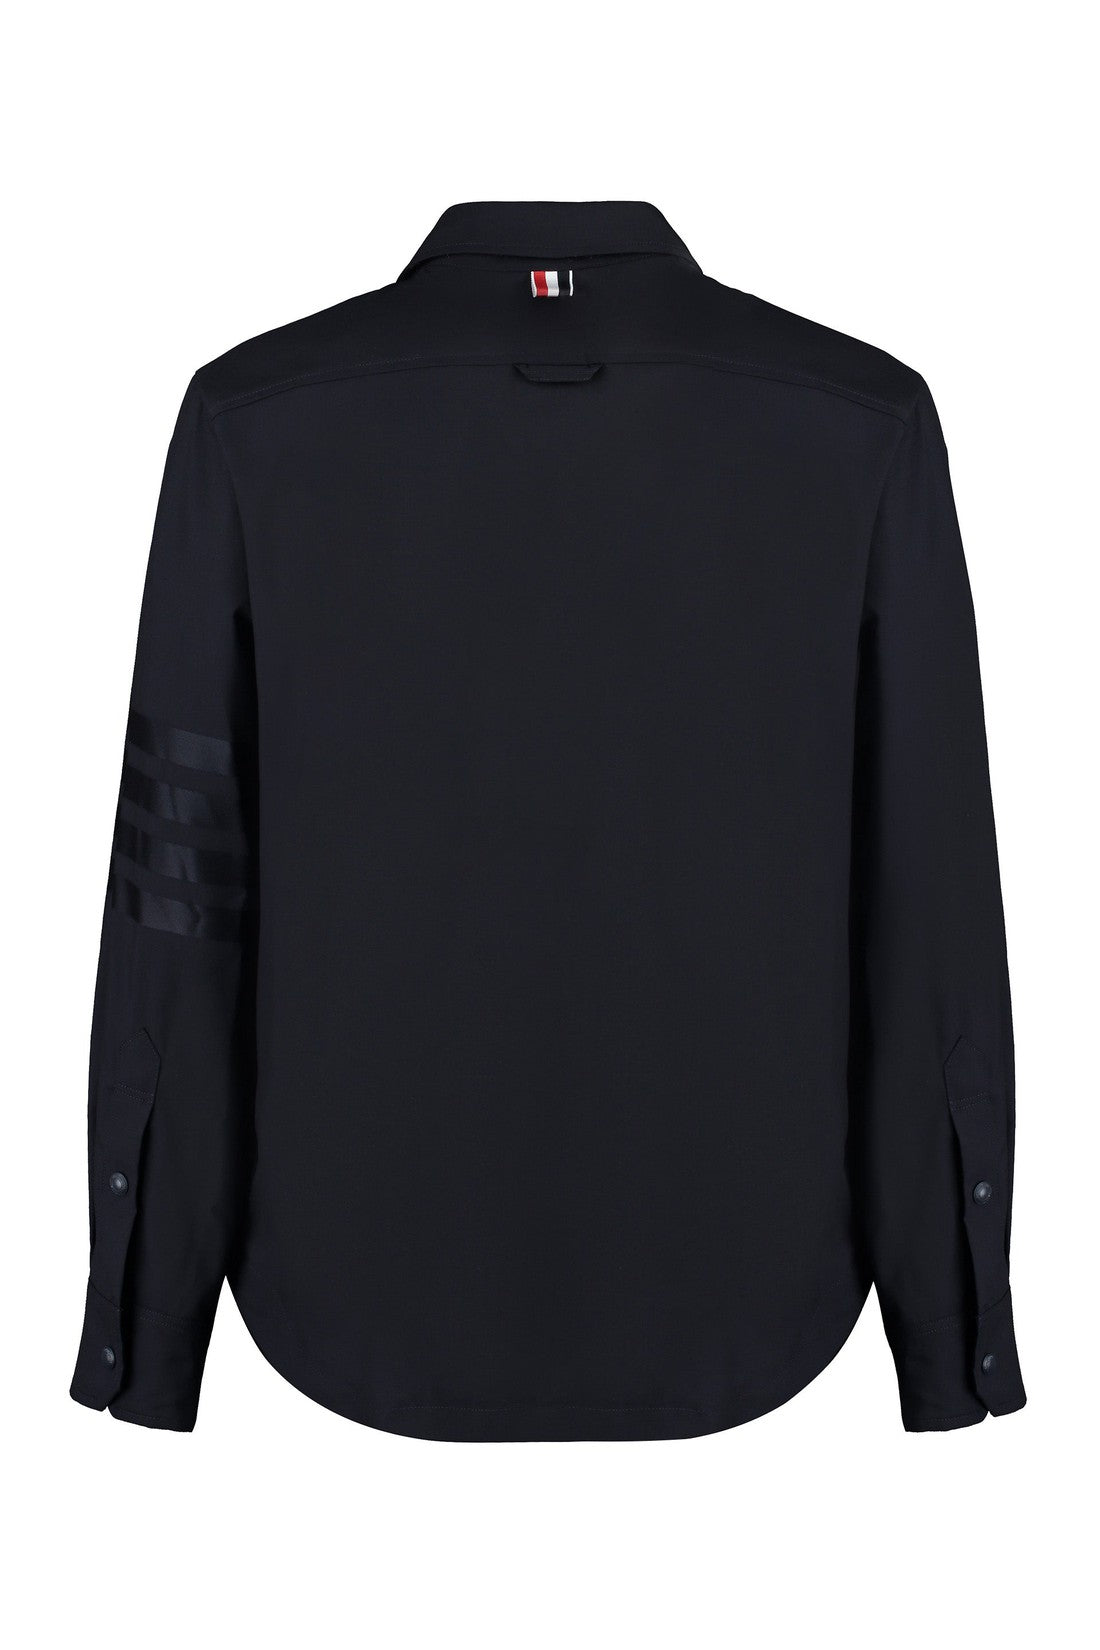 Thom Browne-OUTLET-SALE-Wool overshirt-ARCHIVIST